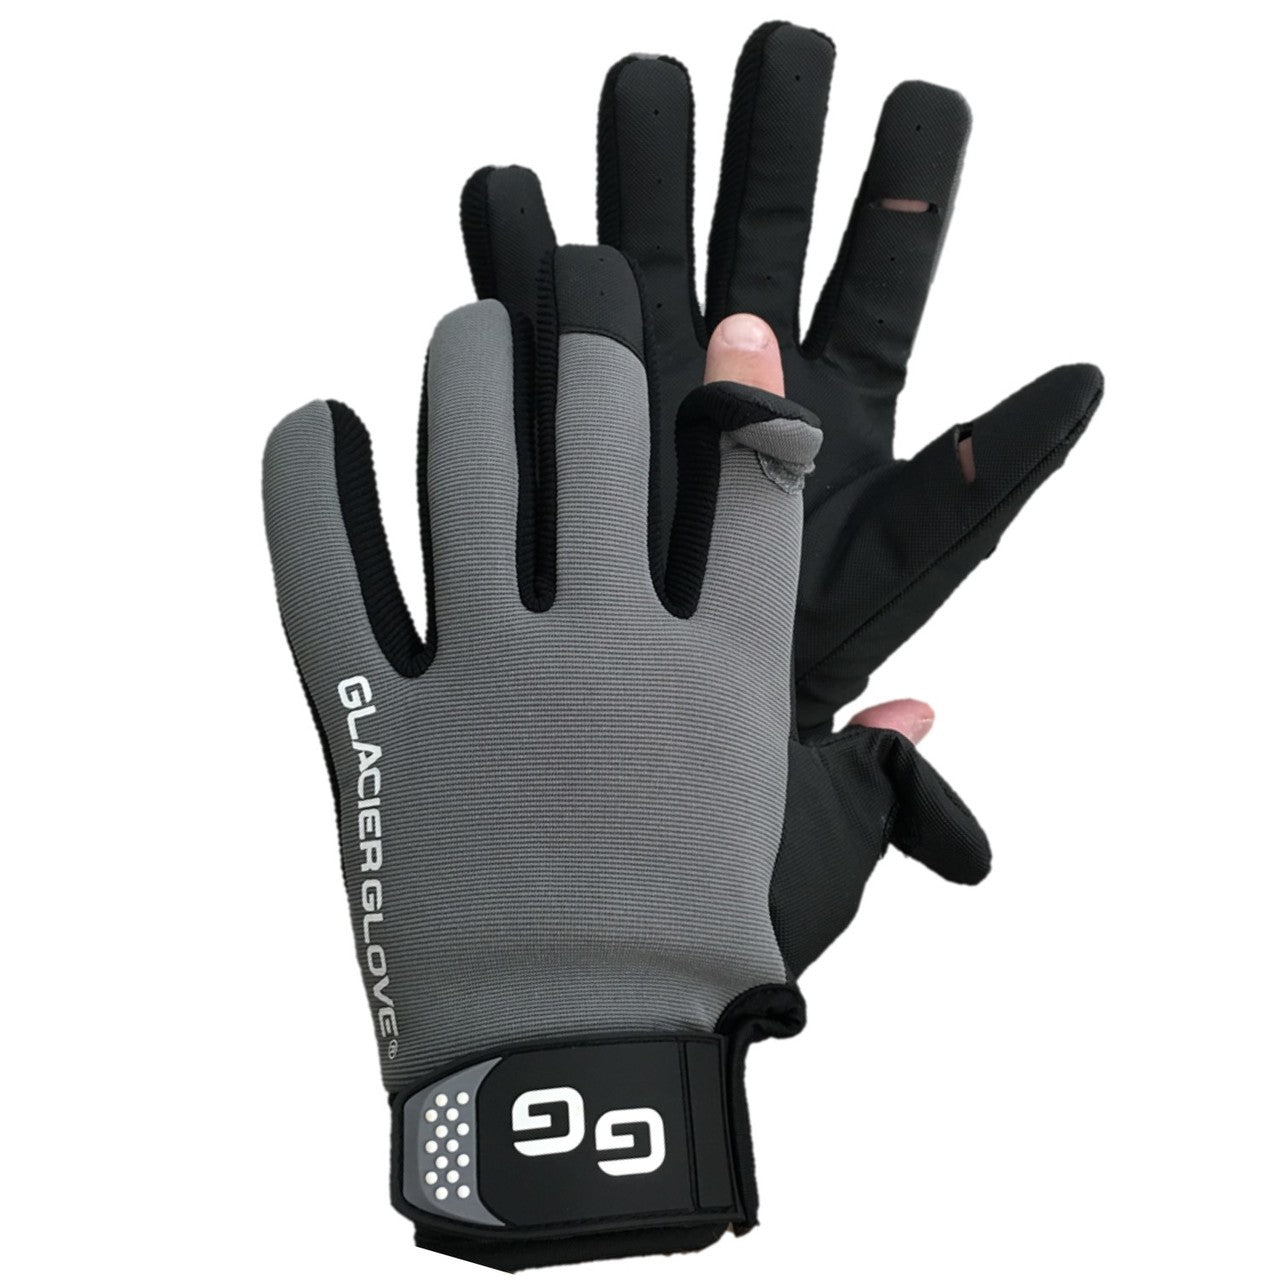 Fishing Gloves – Anglerpower Fishing Tackle